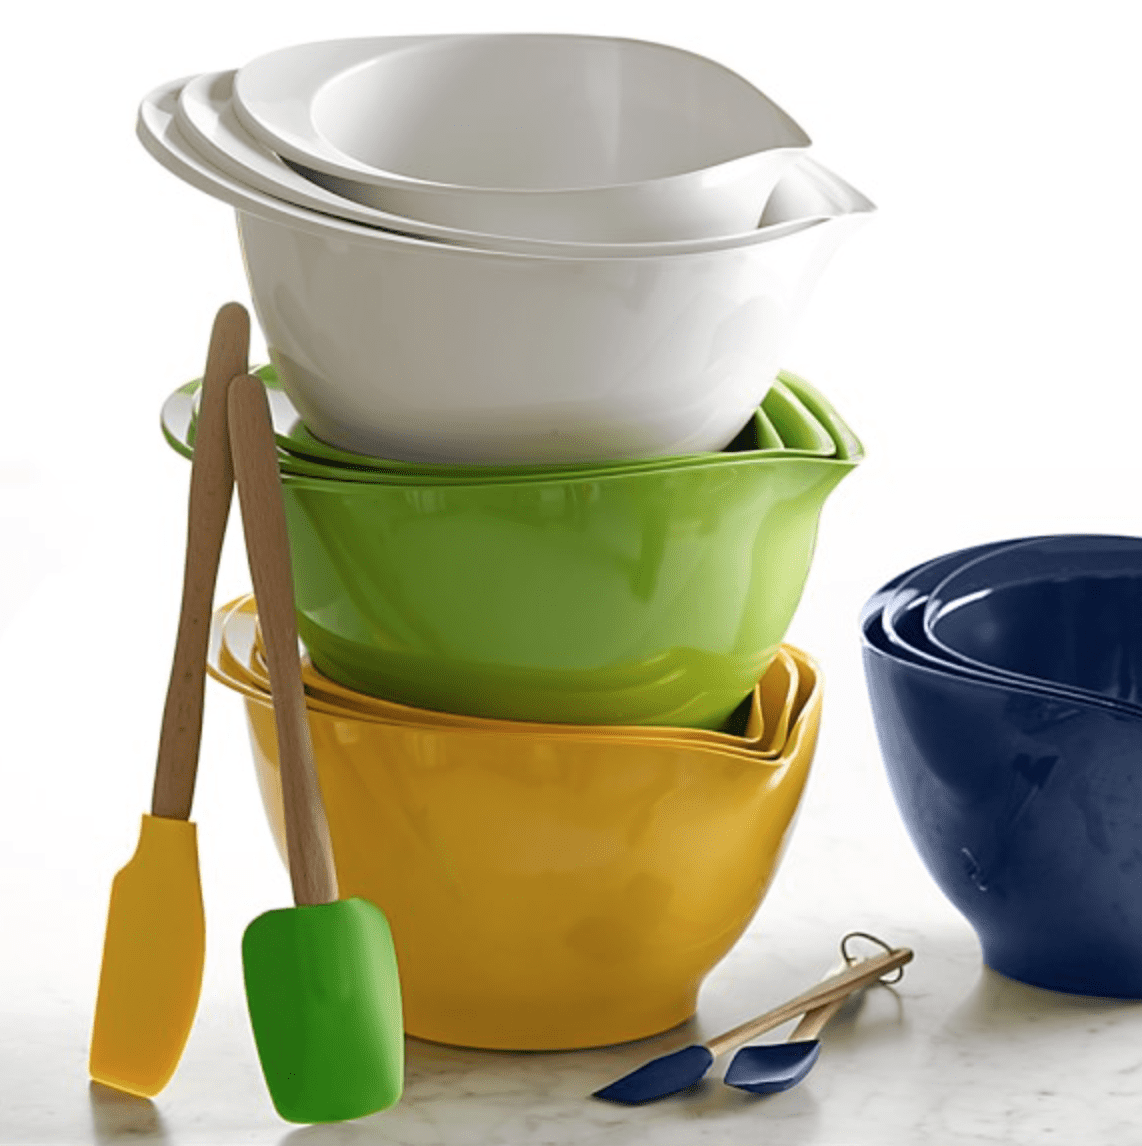 OXO Plastic Good Grips 3-Piece Mixing Bowl Set - Assorted Colors,  Blue/Green/Yellow